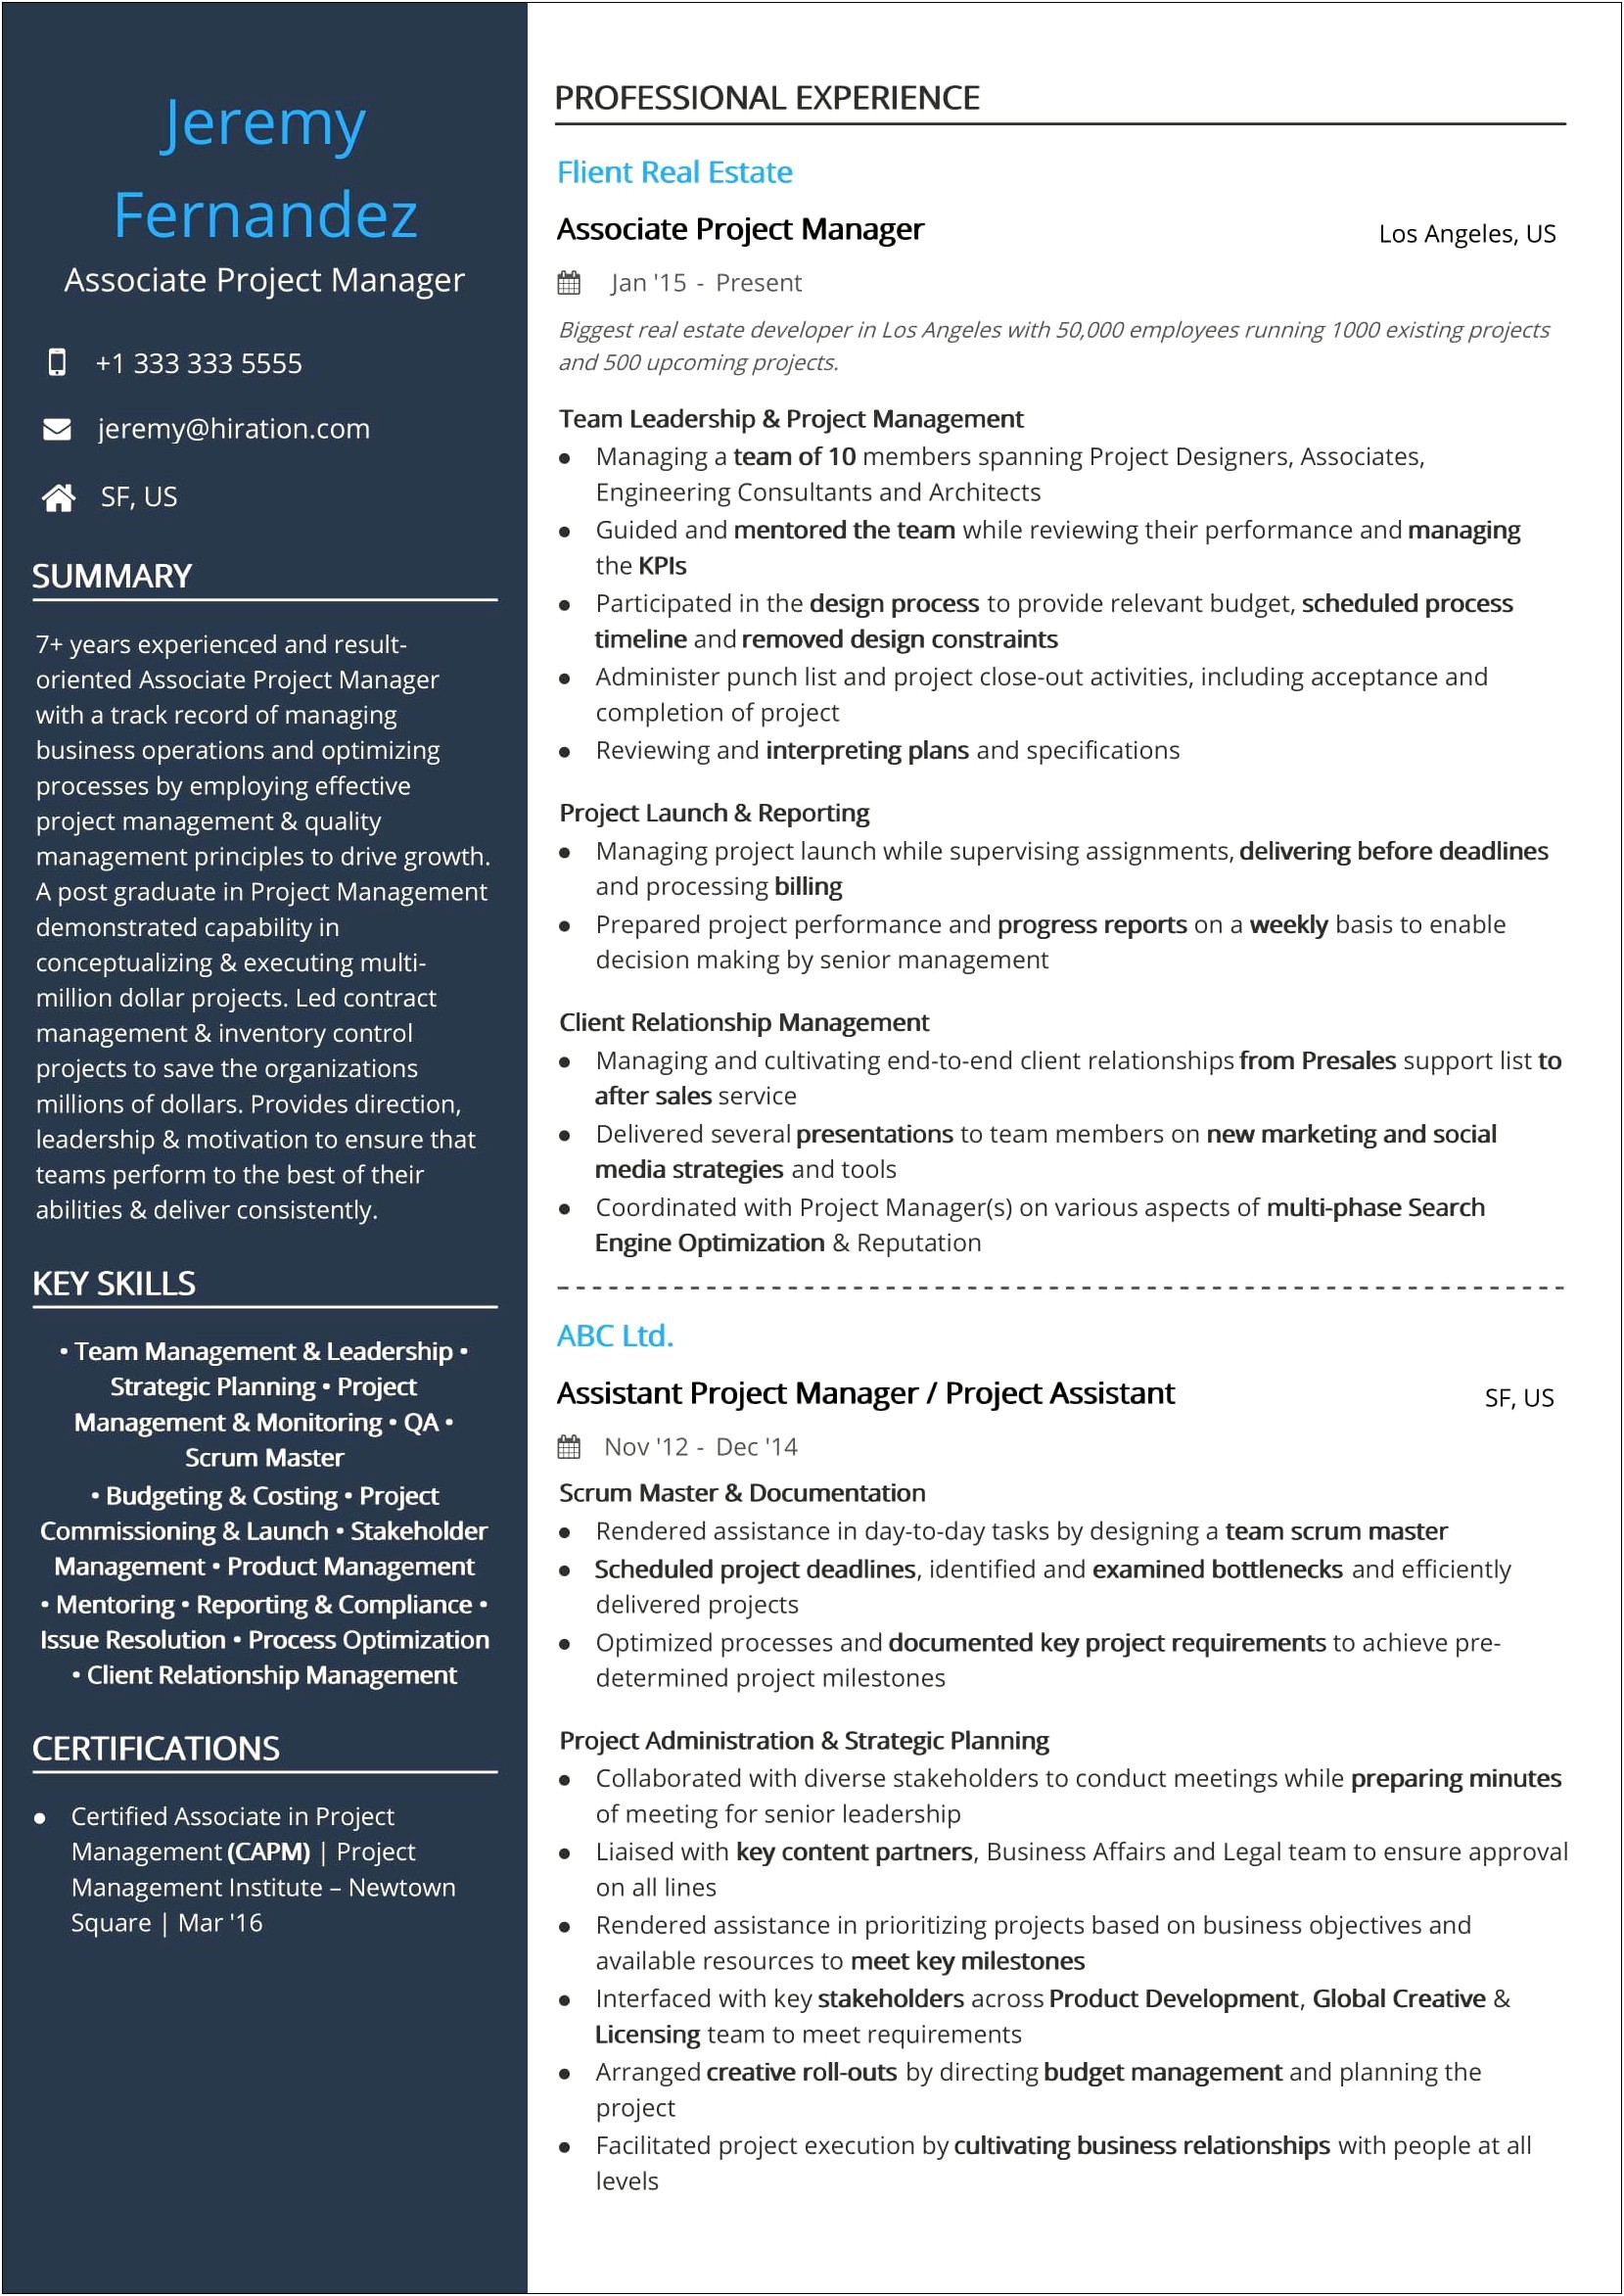 Agile Project Manager Scrum Master Resume